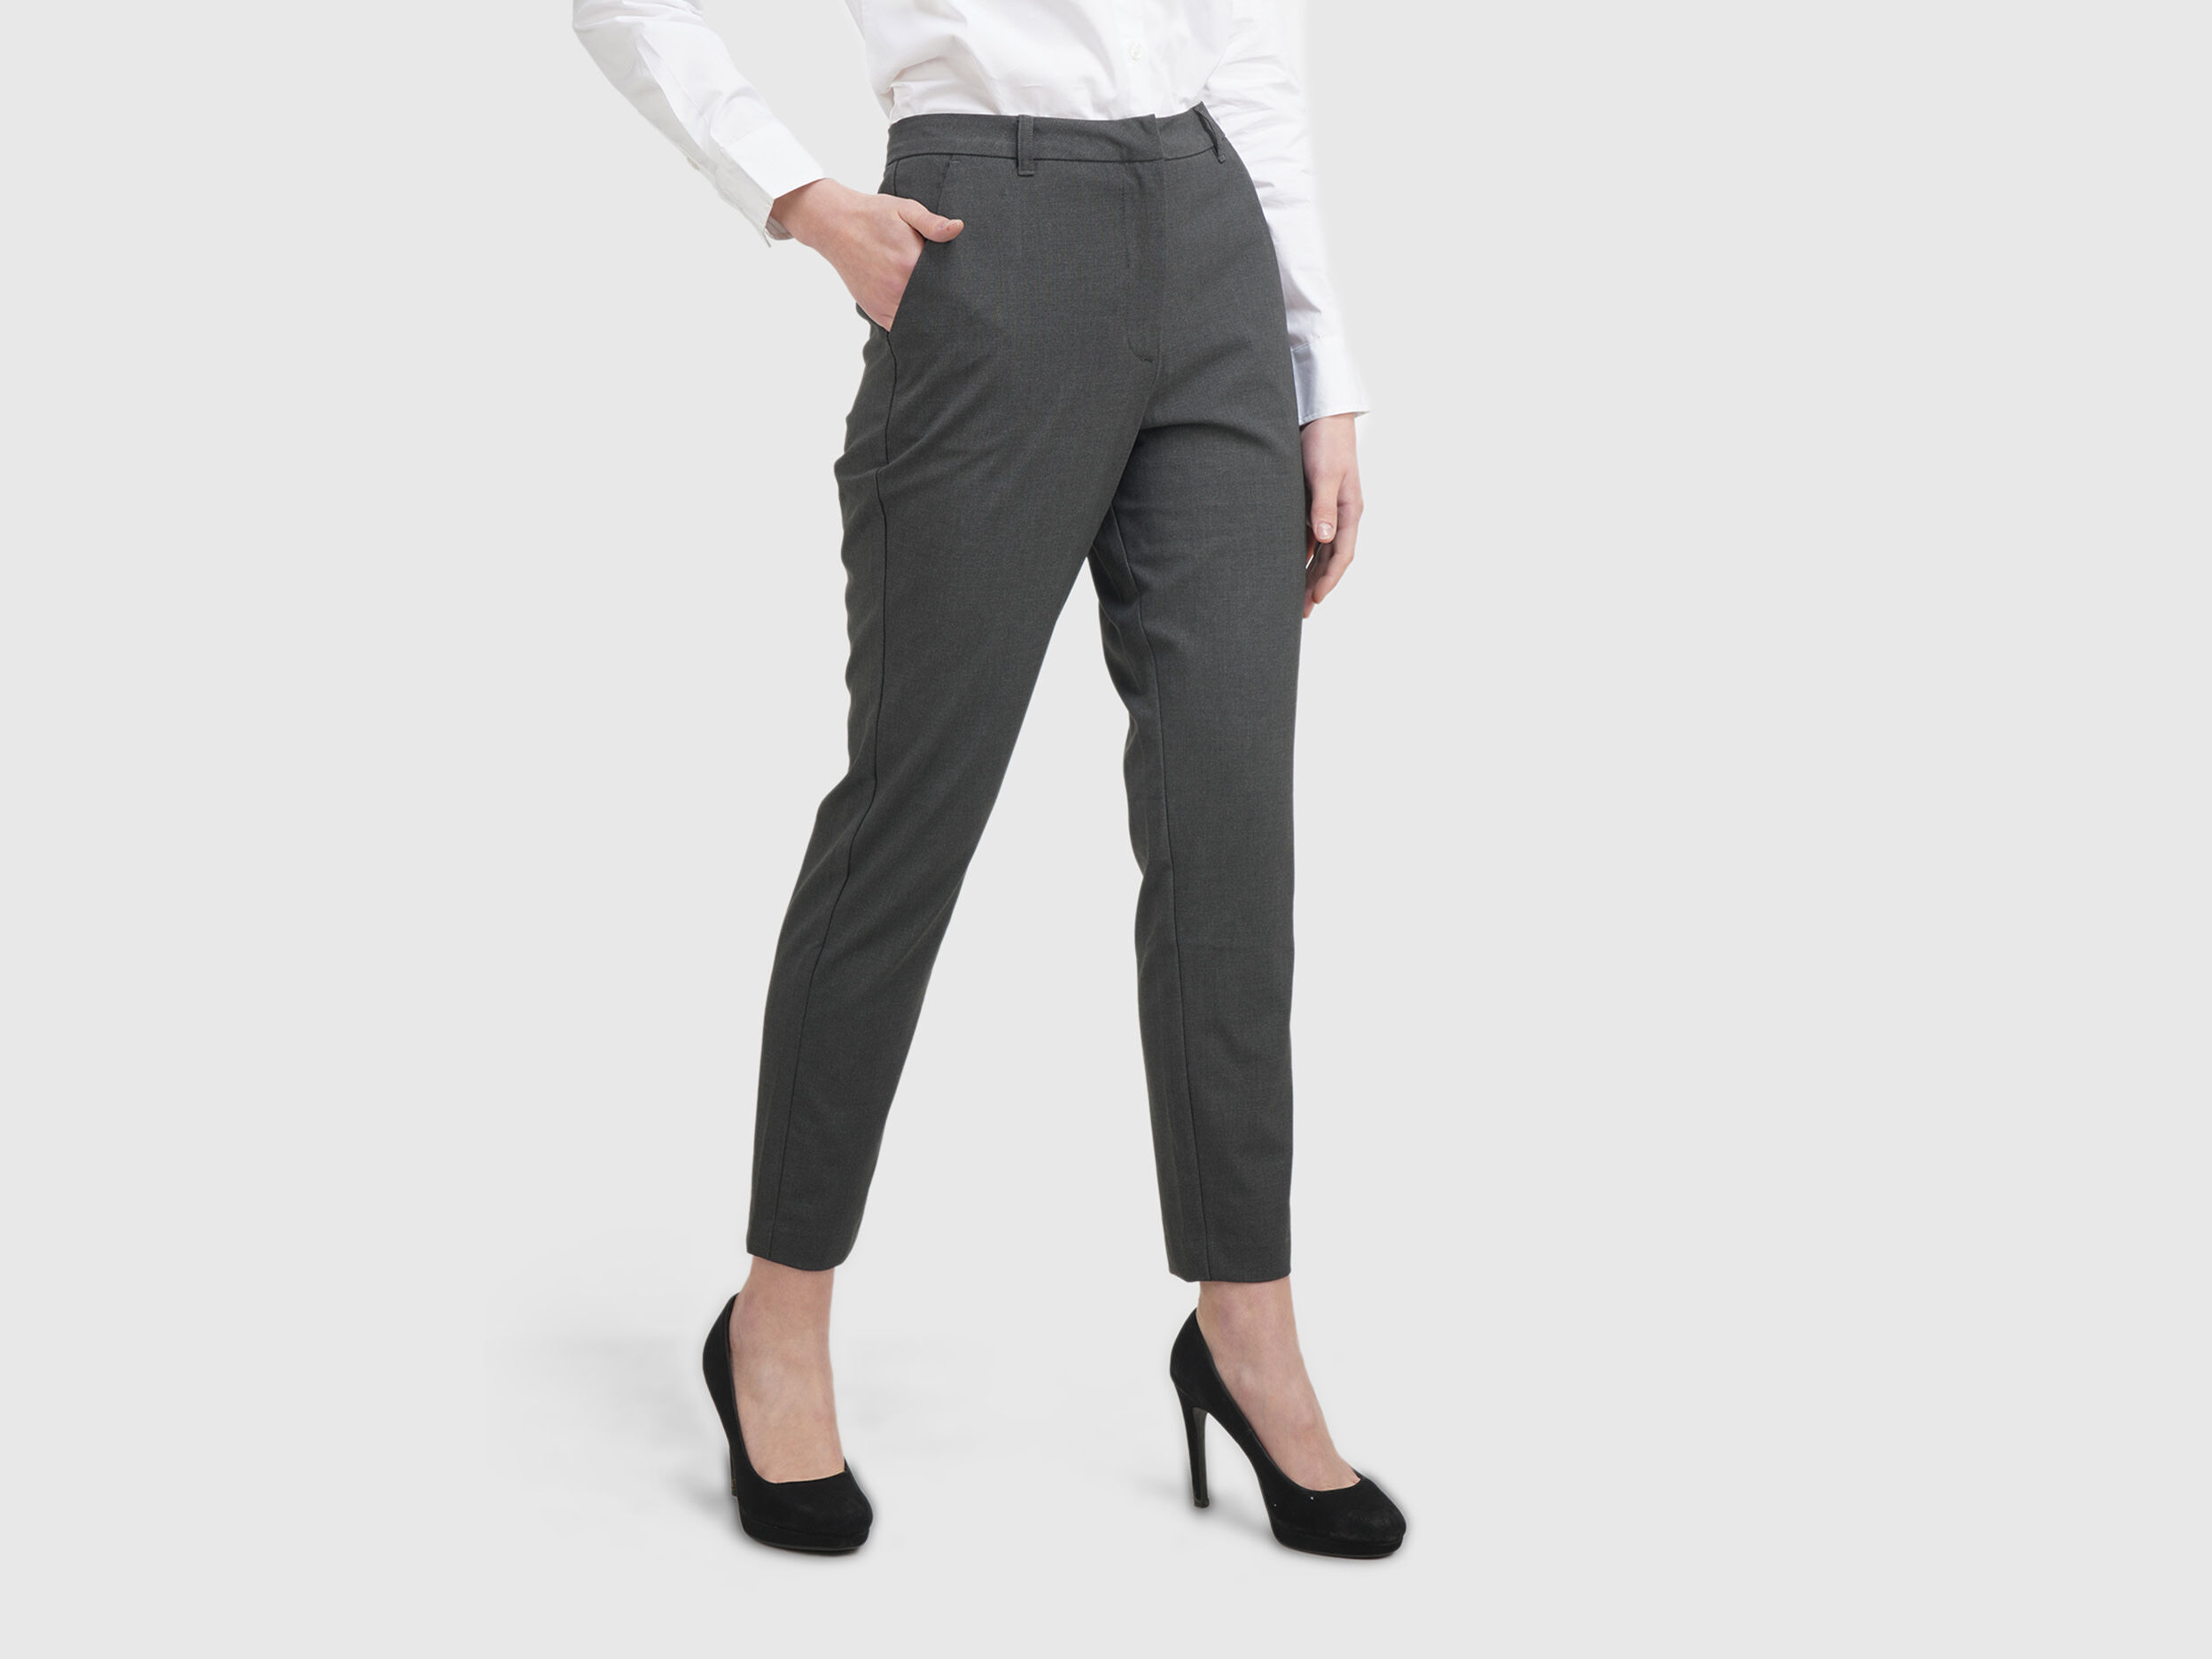 Washable Ladies Cigarette Pants at Best Price in Mira Bhayandar | Luxostyle